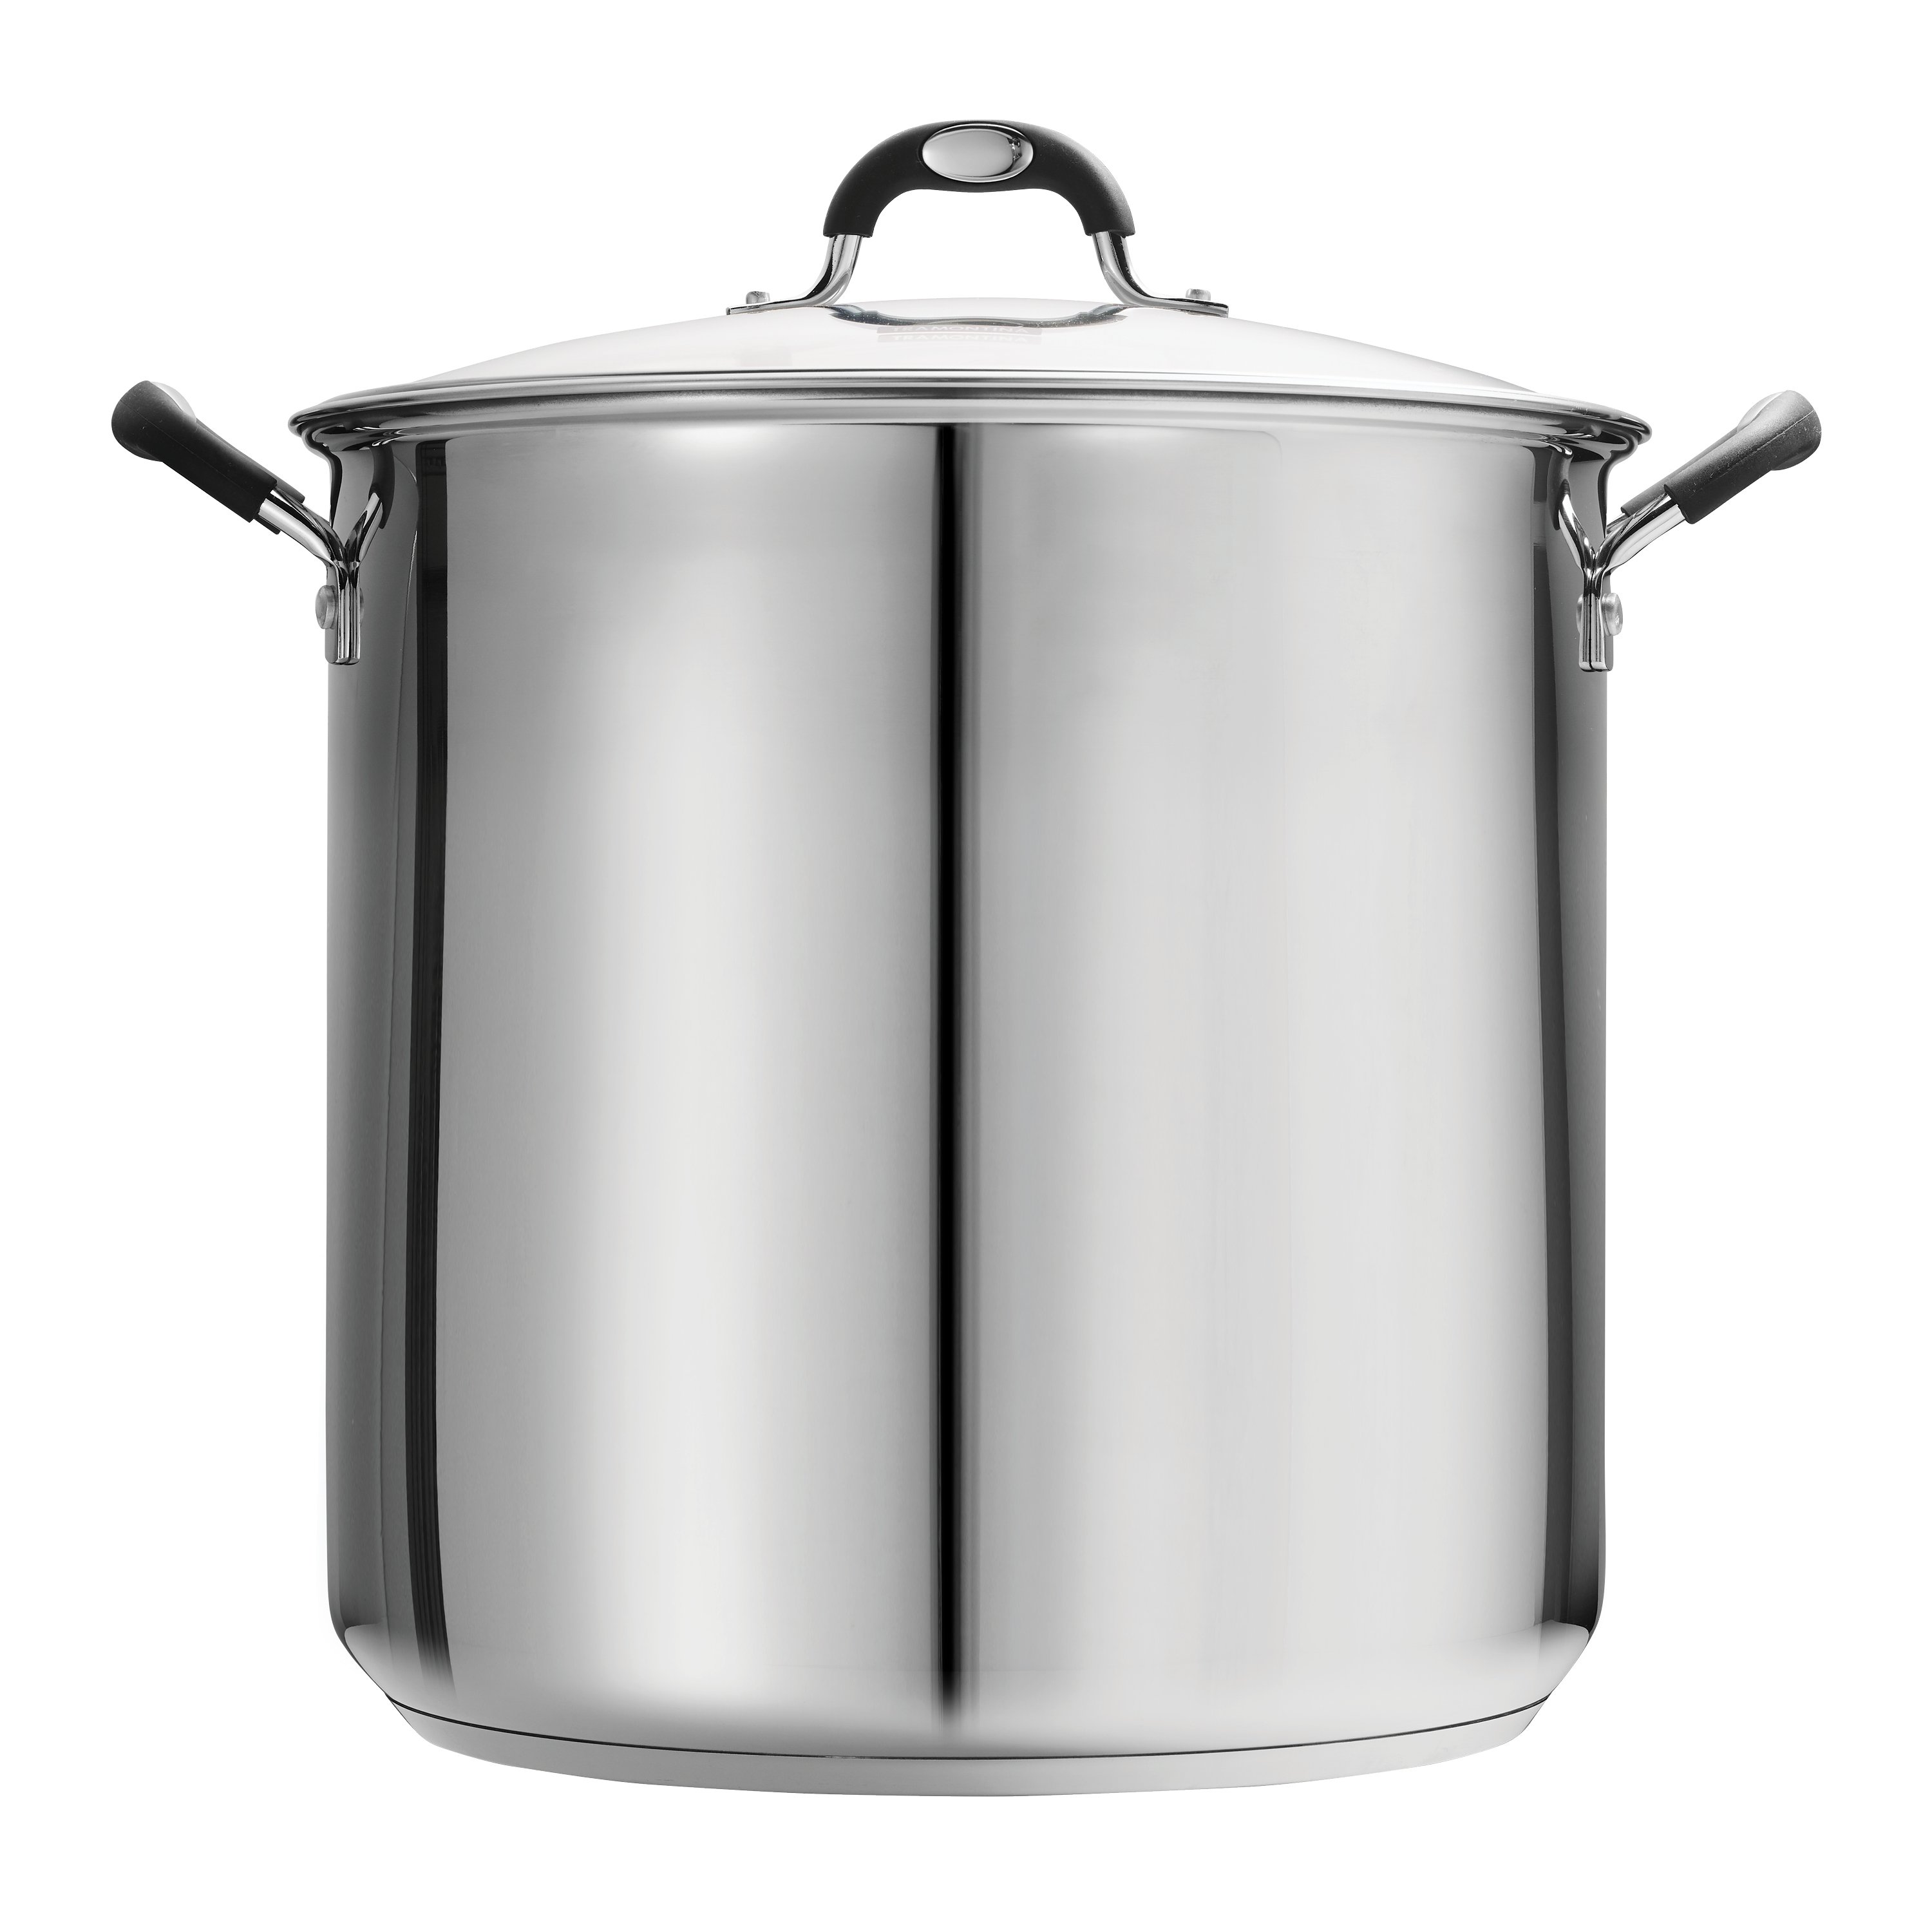  22 Qt Tramontina Stainless Steel Covered Stockpot, Induction  Ready, 3ply Base, Clear Lid: Home & Kitchen